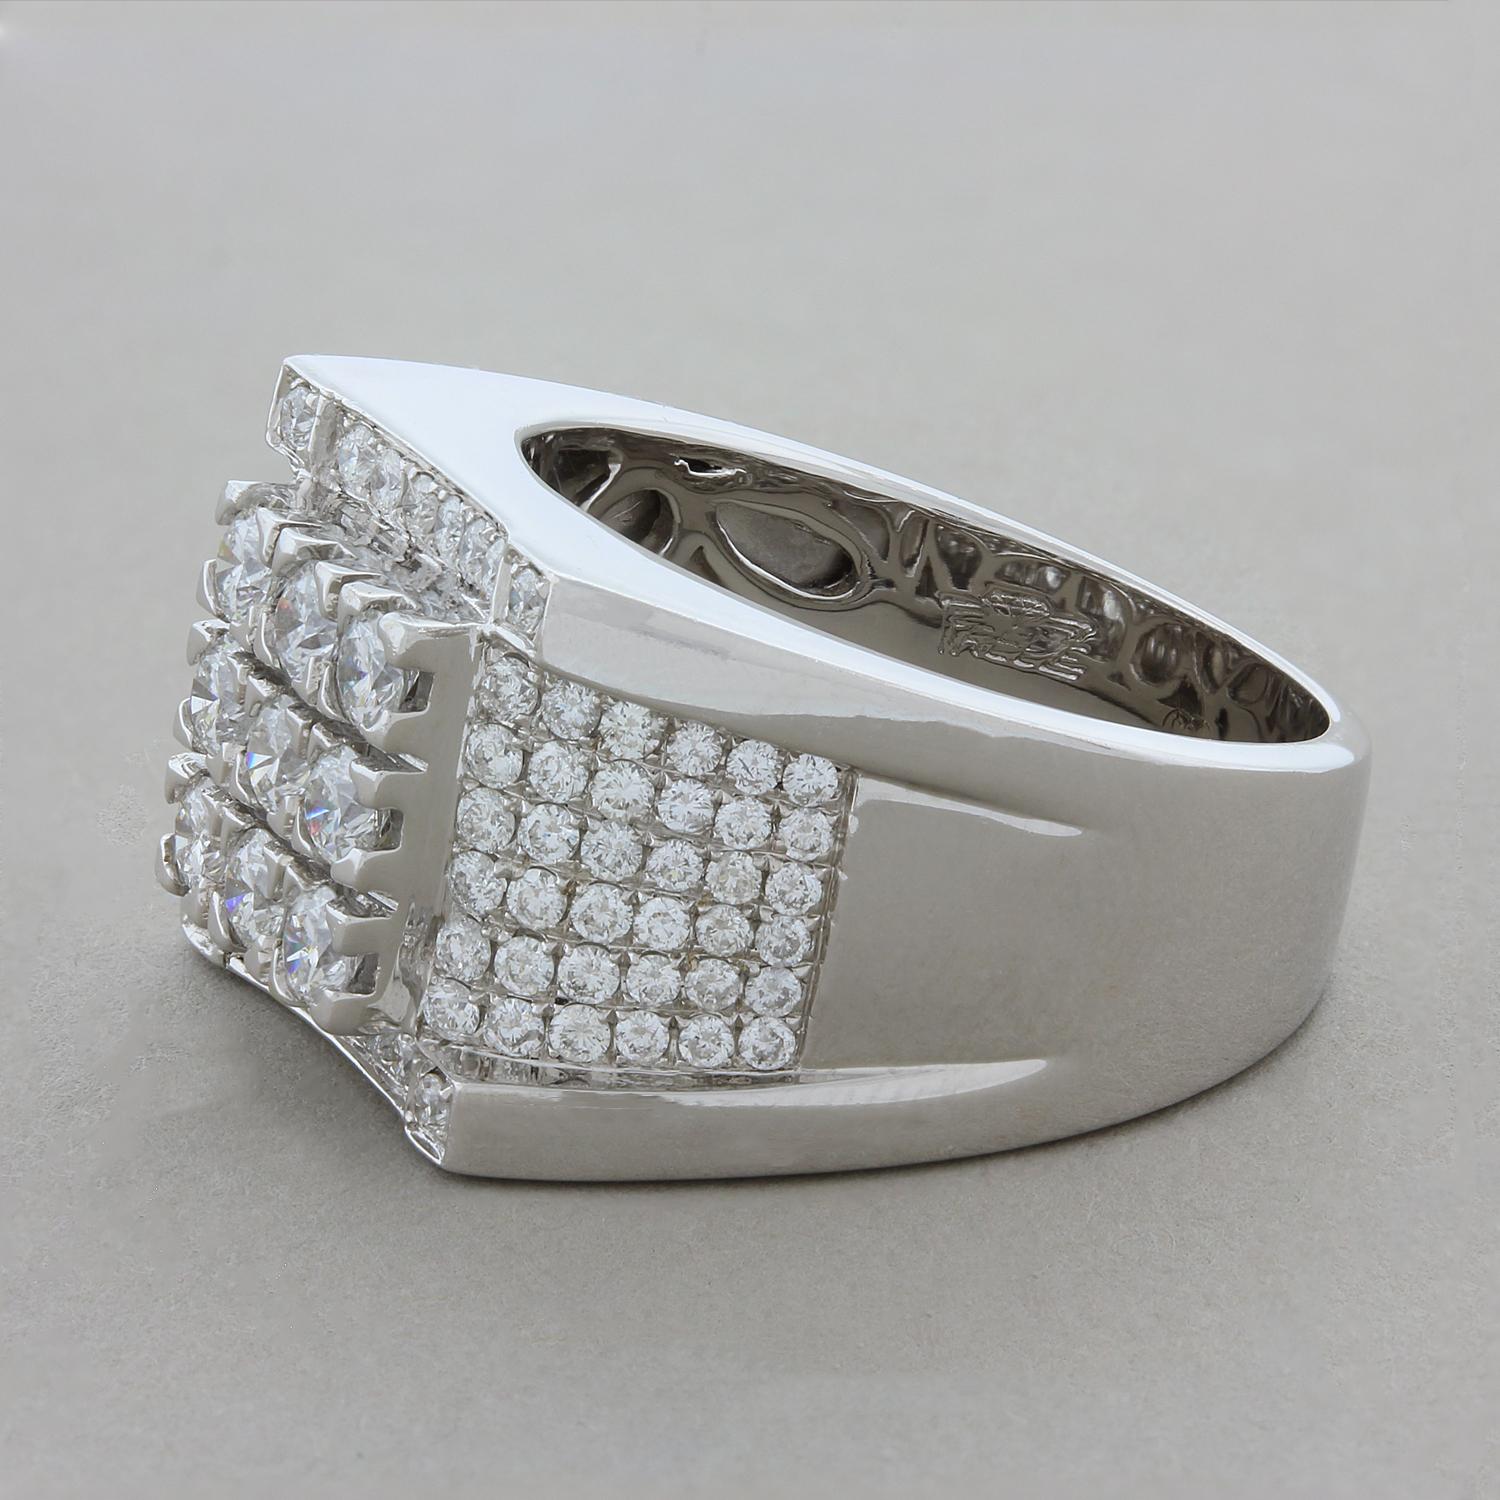 This exquisite men’s ring features 2.48 carats of round cut diamonds. The 14K white gold setting has a flat top with three sides giving it a unique flare.

Ring Size 10.75 (Sizable)
